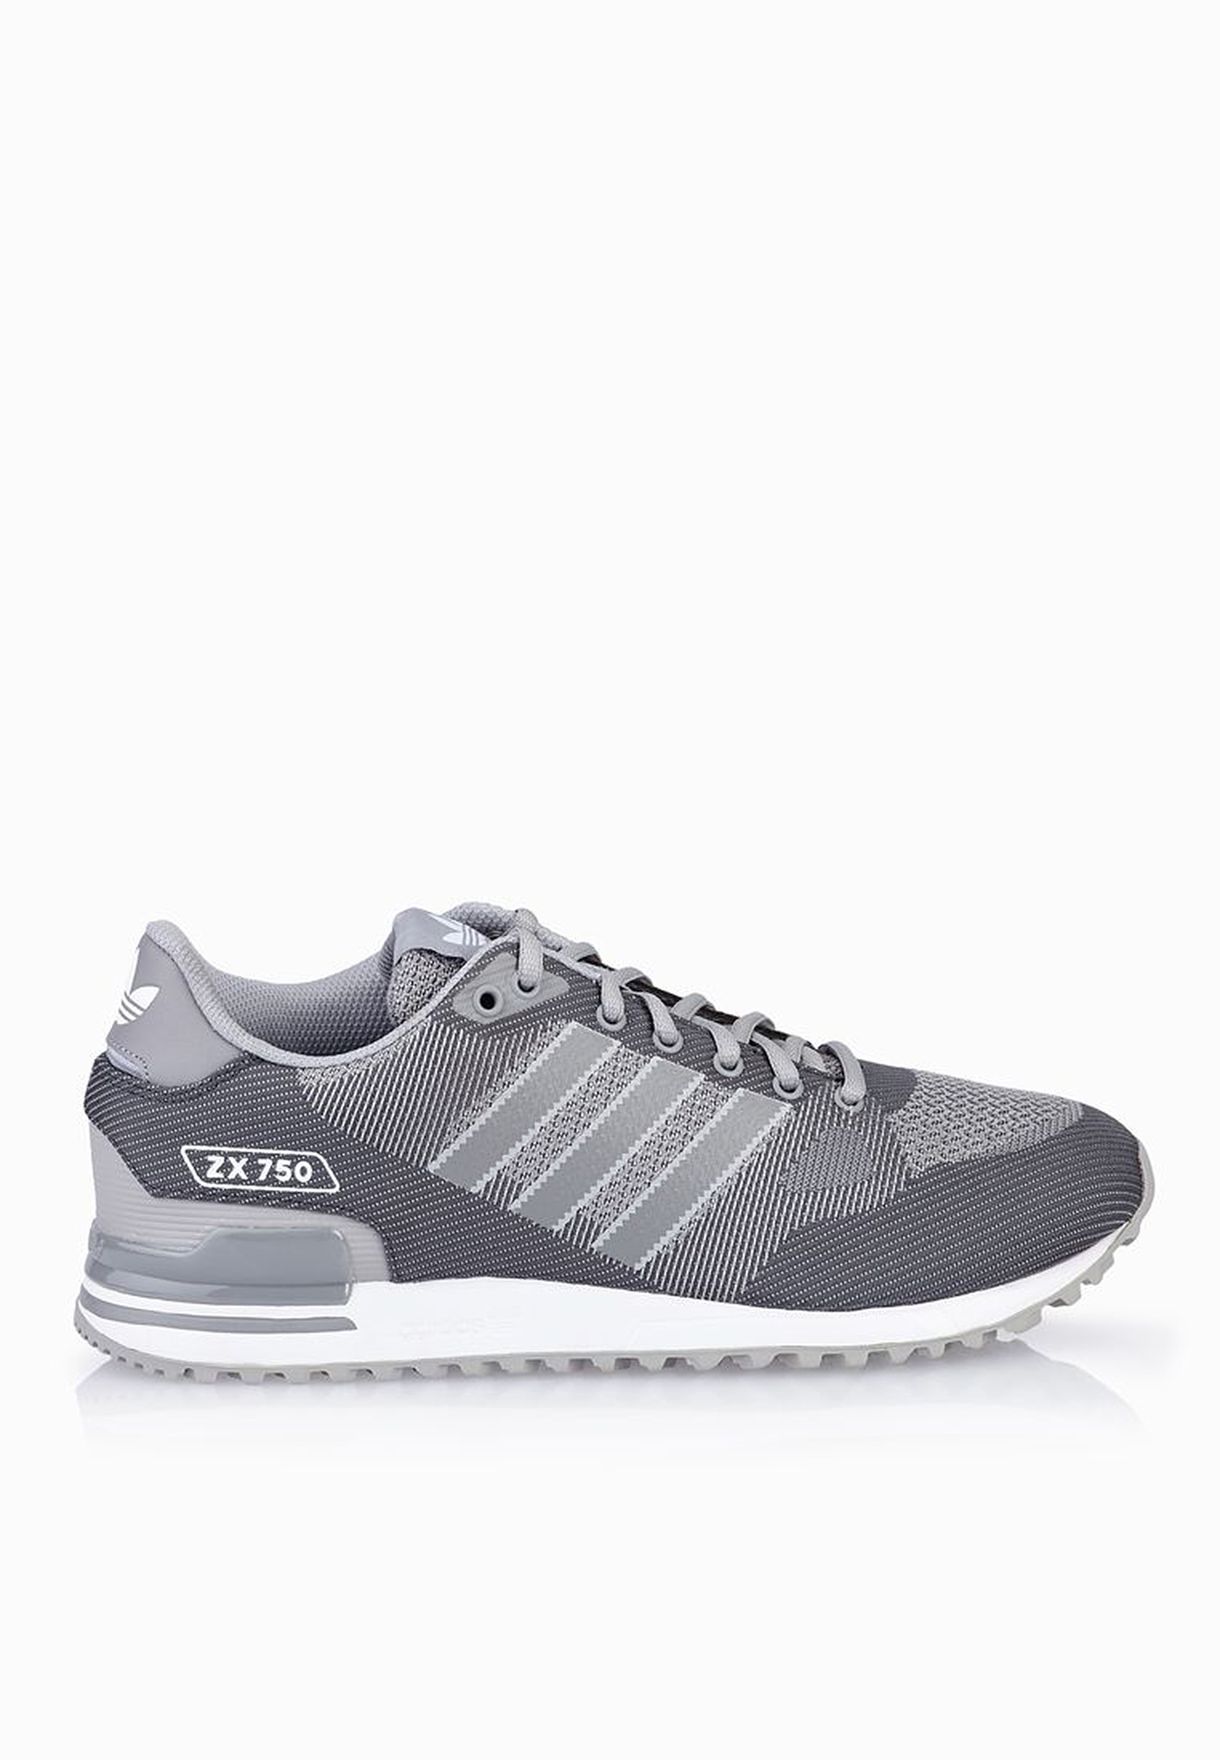 zx 750 weave adidas